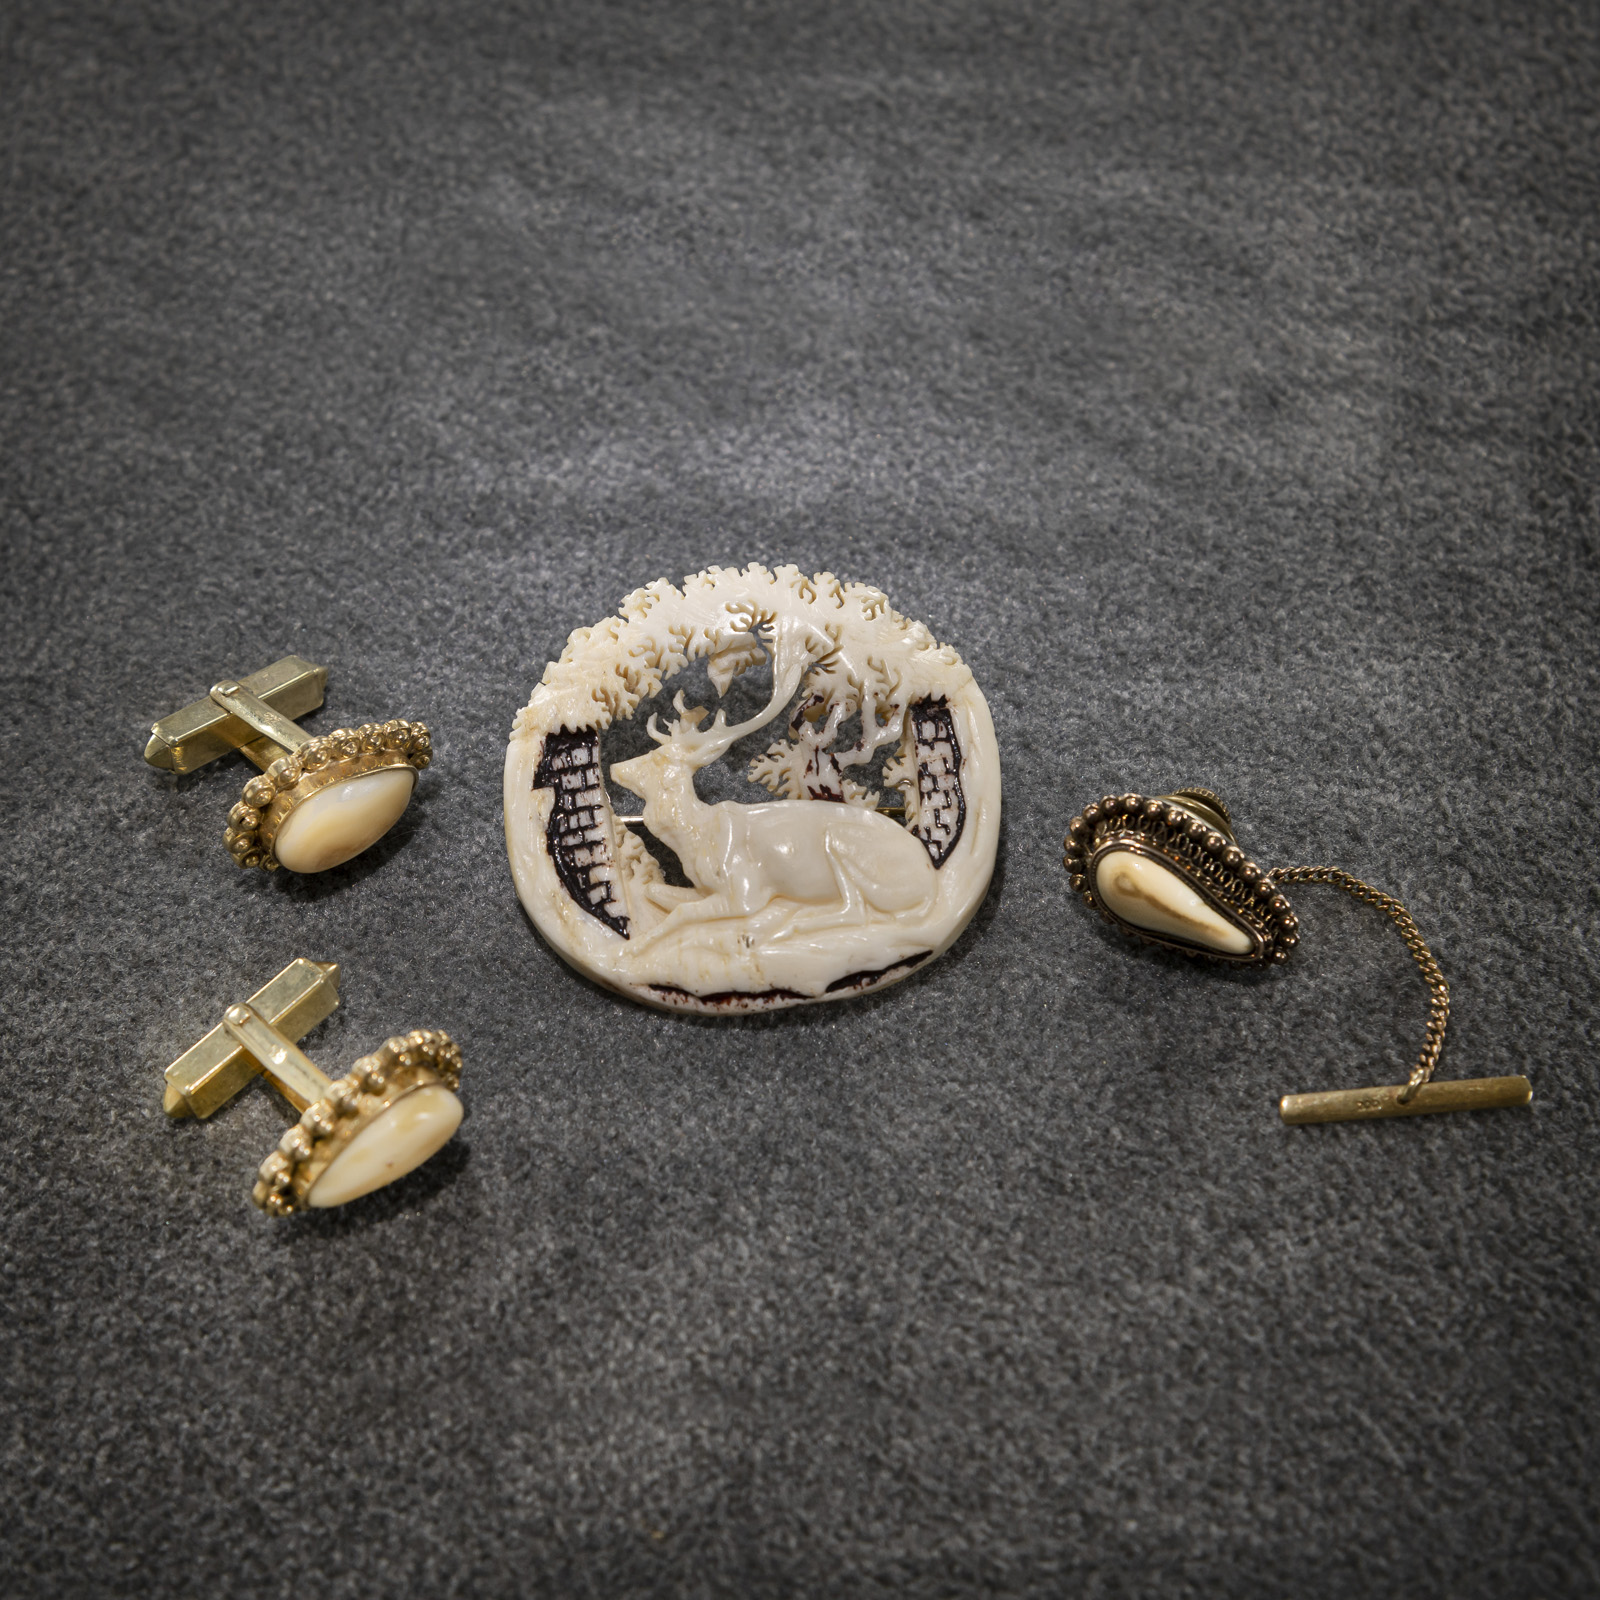 A CARVED BONE HUNTING BROOCH, A PAIR OF CUFF LINKS AND A STICK PIN